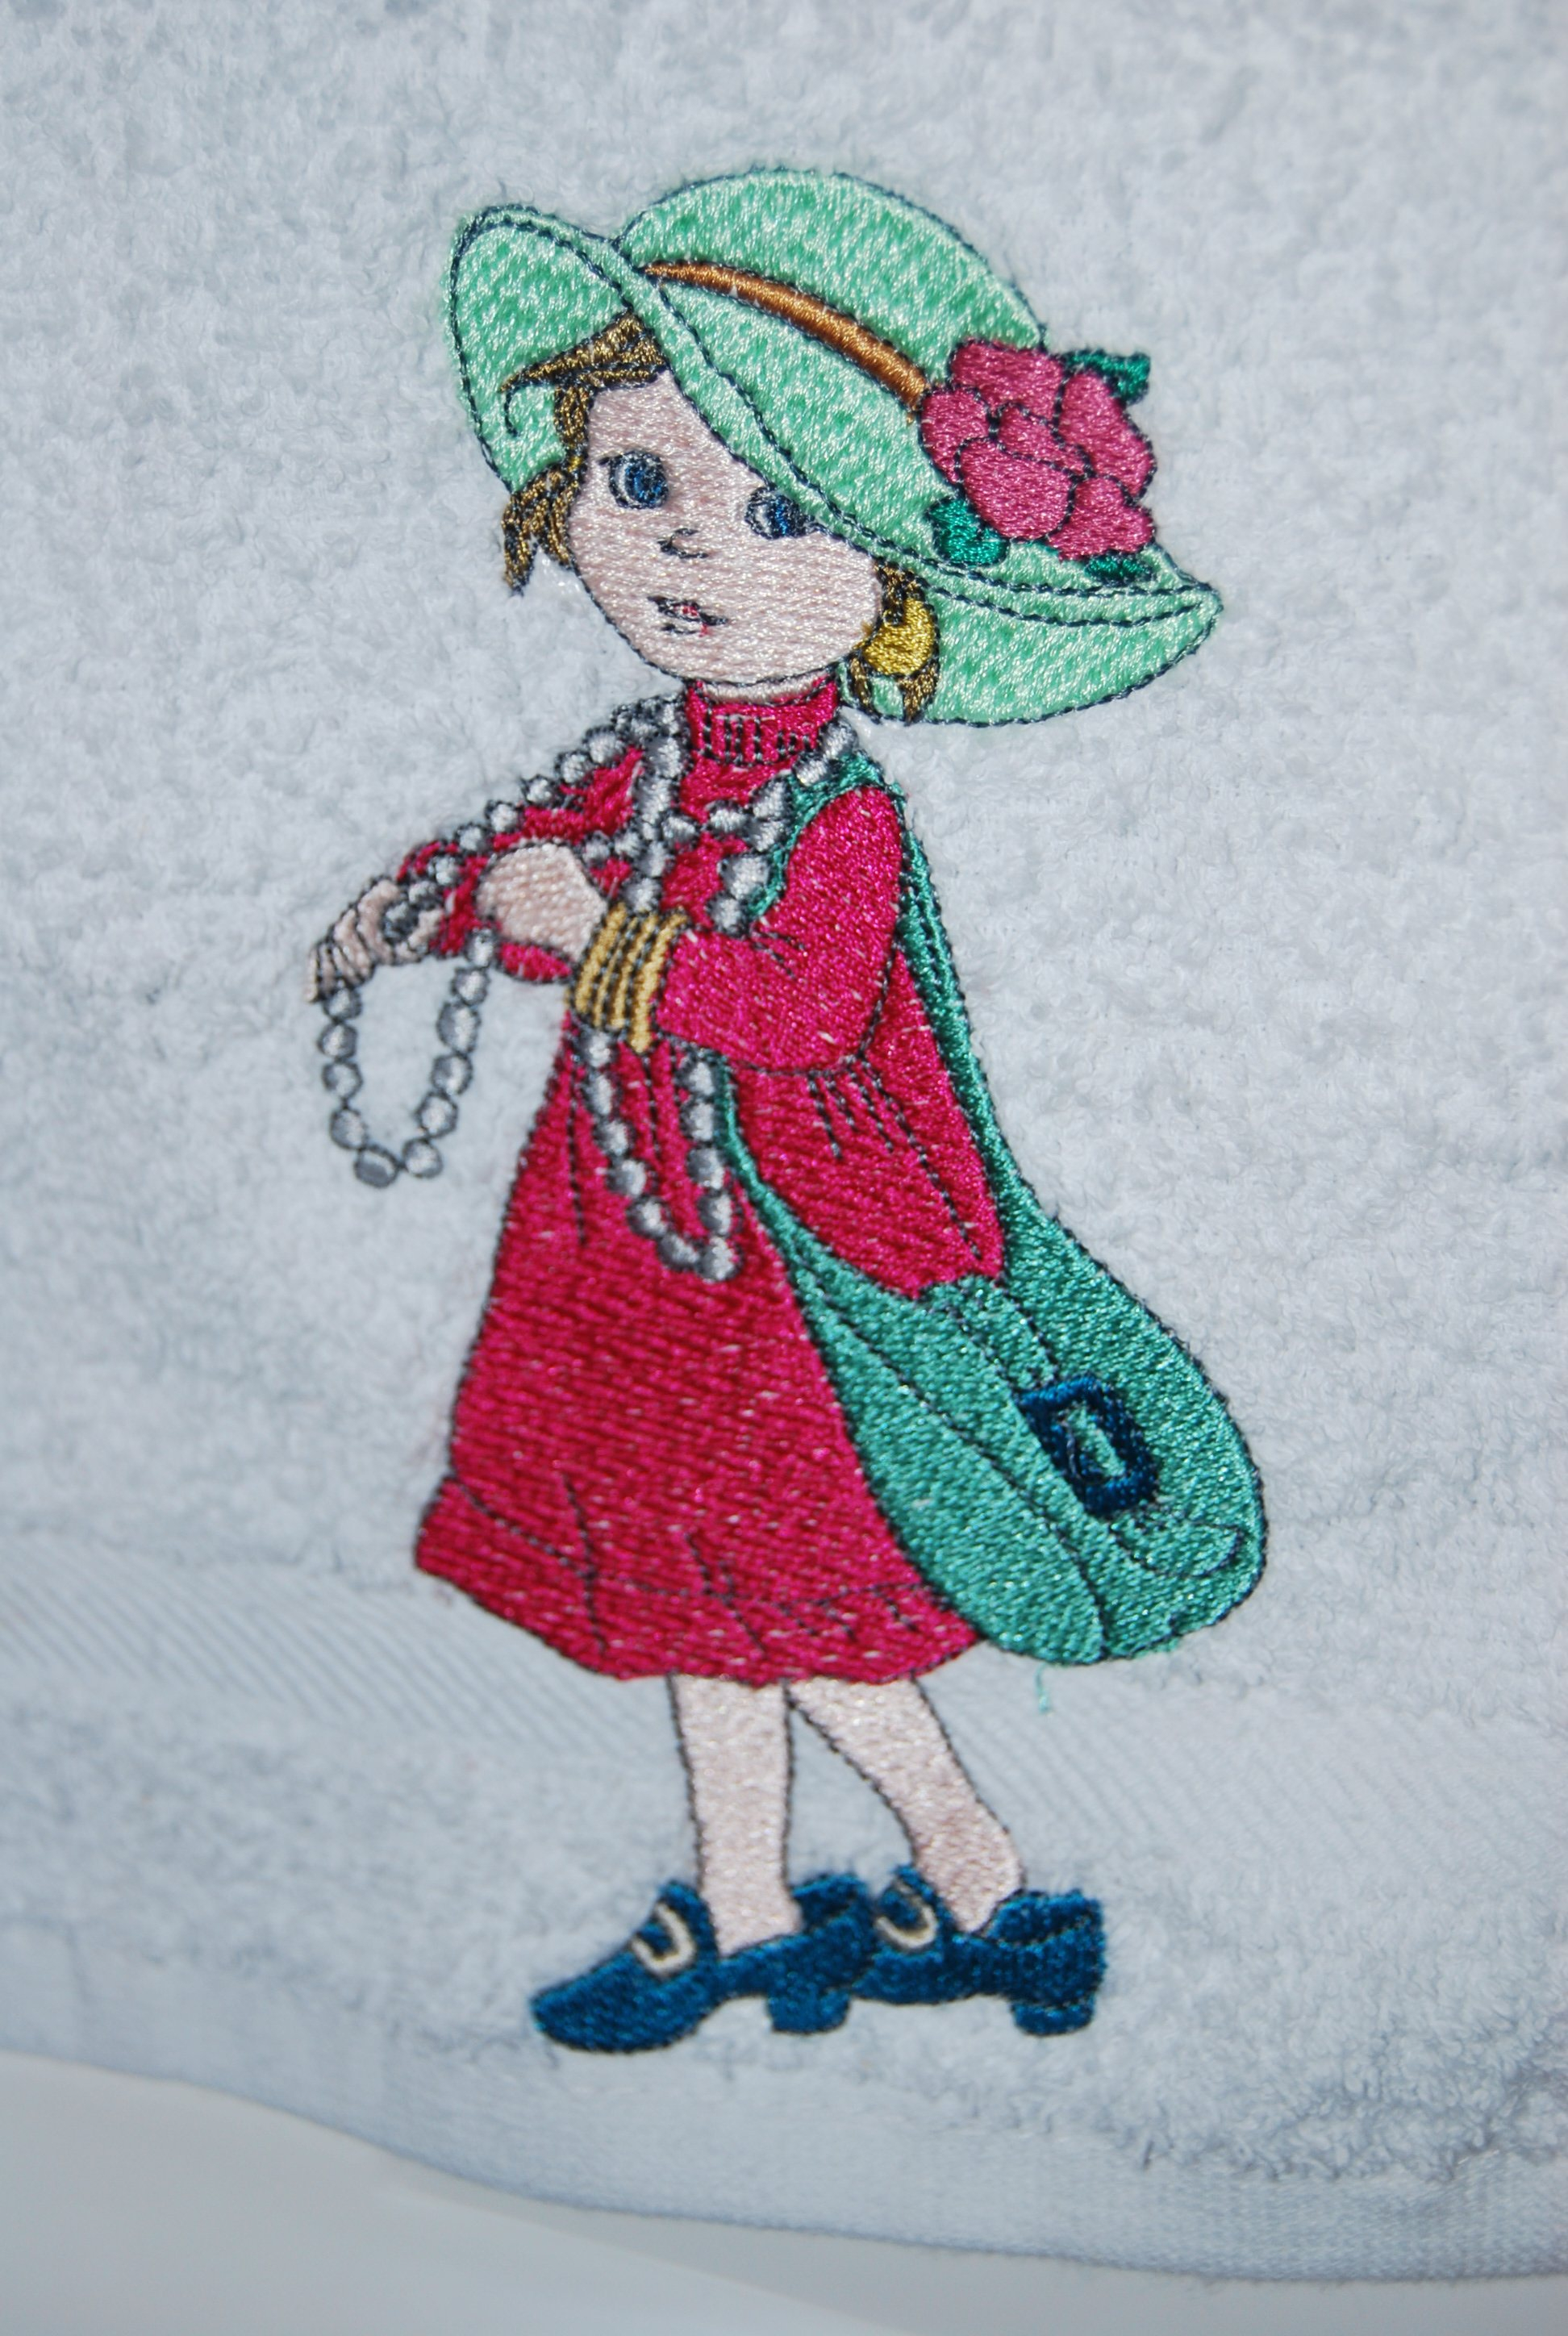 Kids Embroidery Patterns Free Embroidery Designs Cute Embroidery Designs